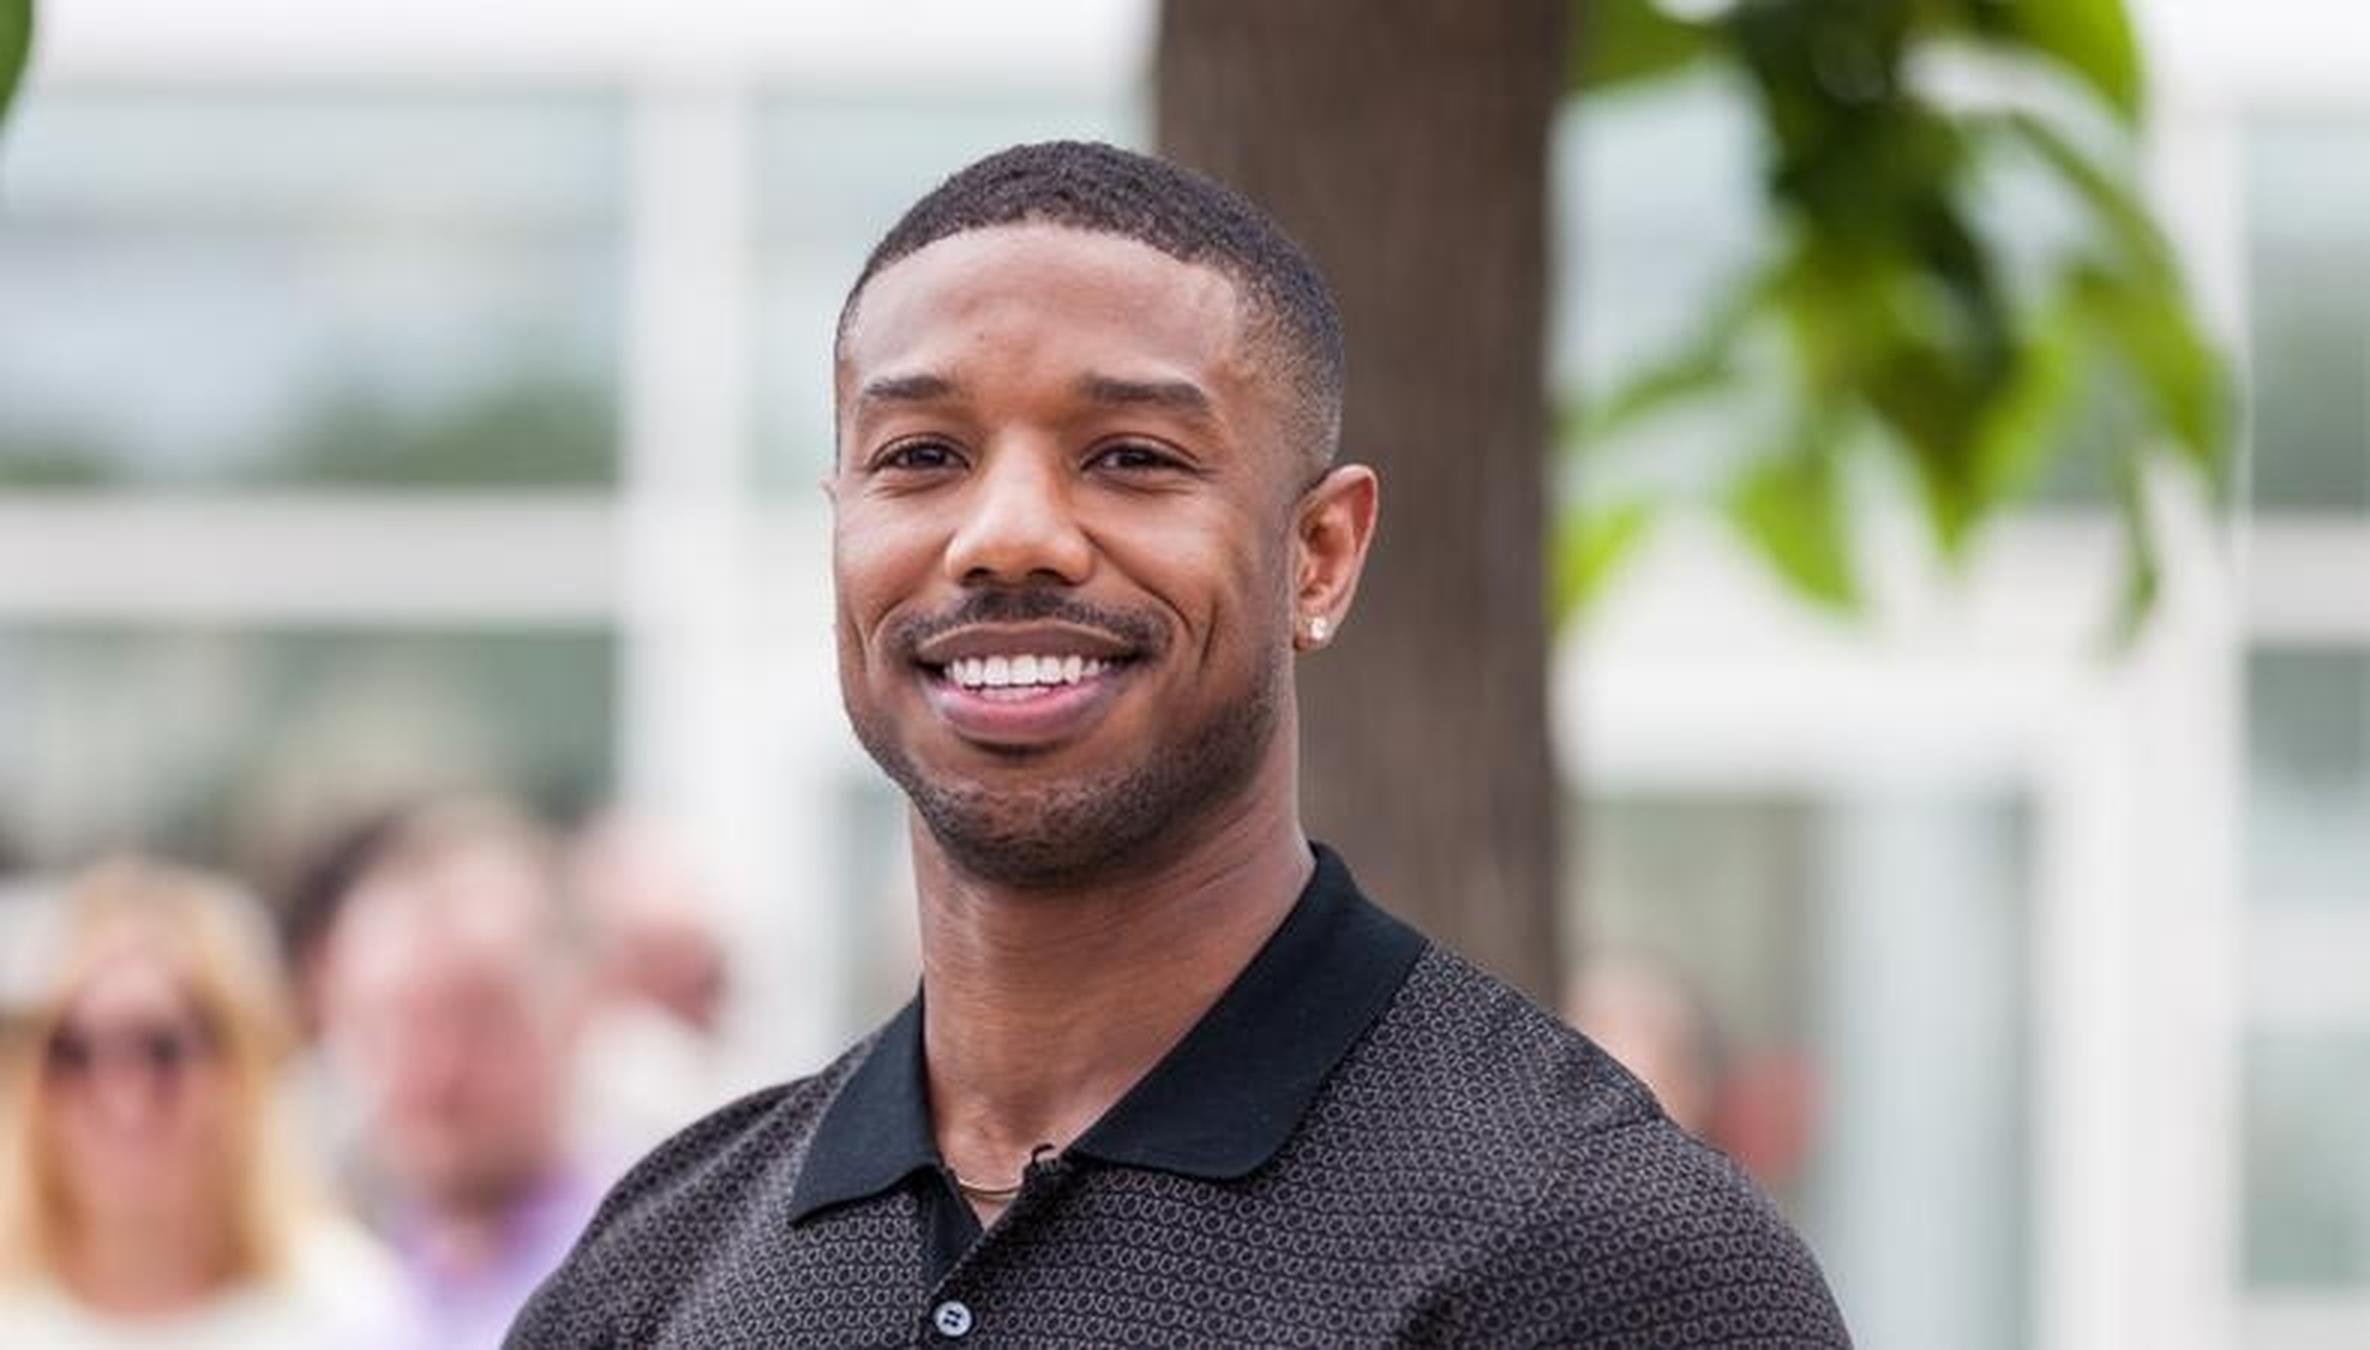 See who's playing Michael B. Jordan's wife and son in Netflix show 'Raising  Dion